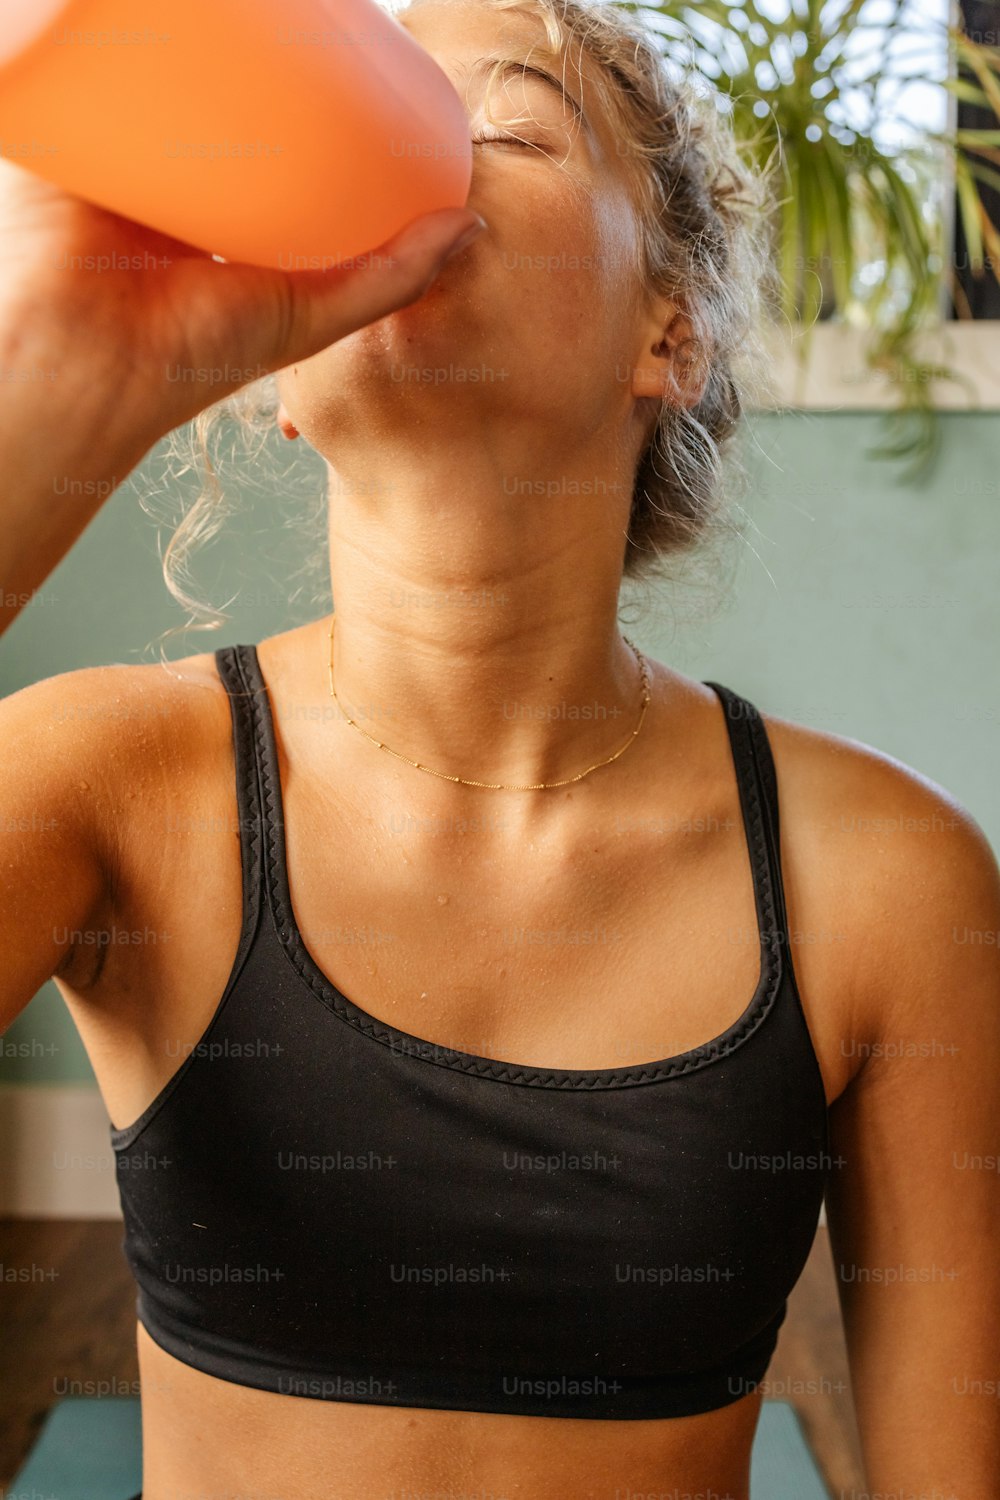 a woman in a sports bra drinking from an orange cup